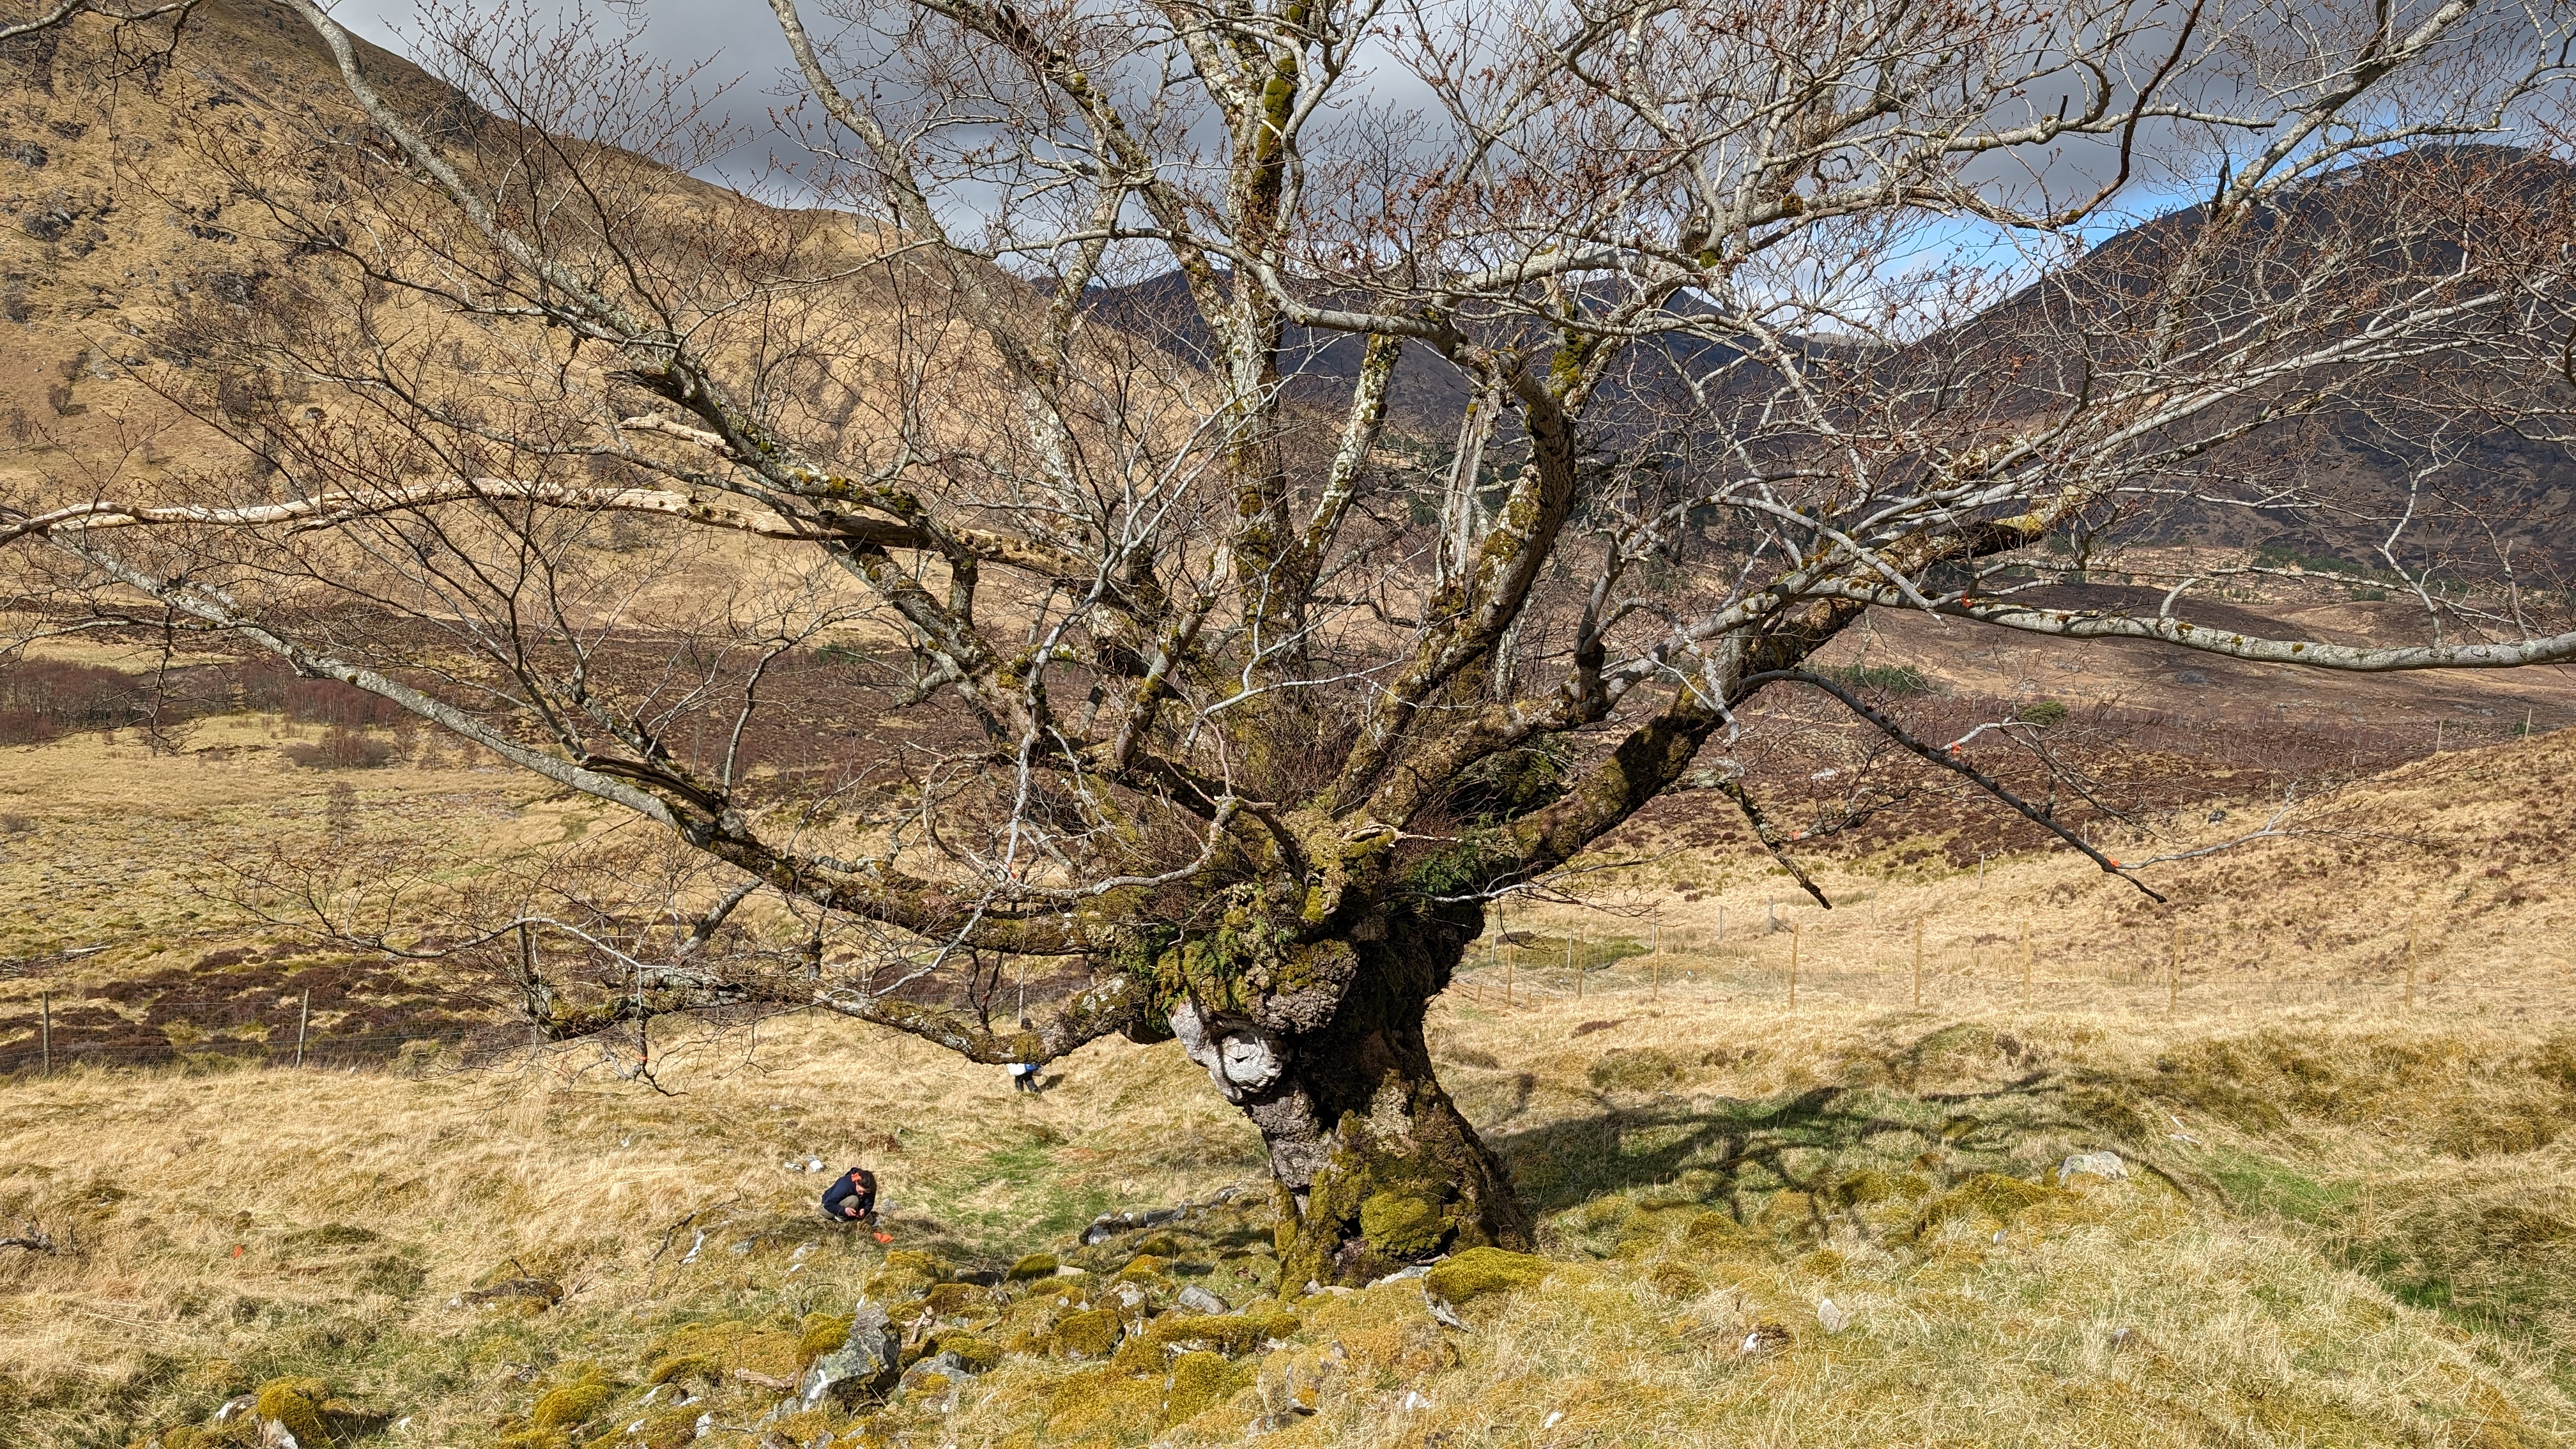 Elm tree on its own in the landscape in Glen Affric.